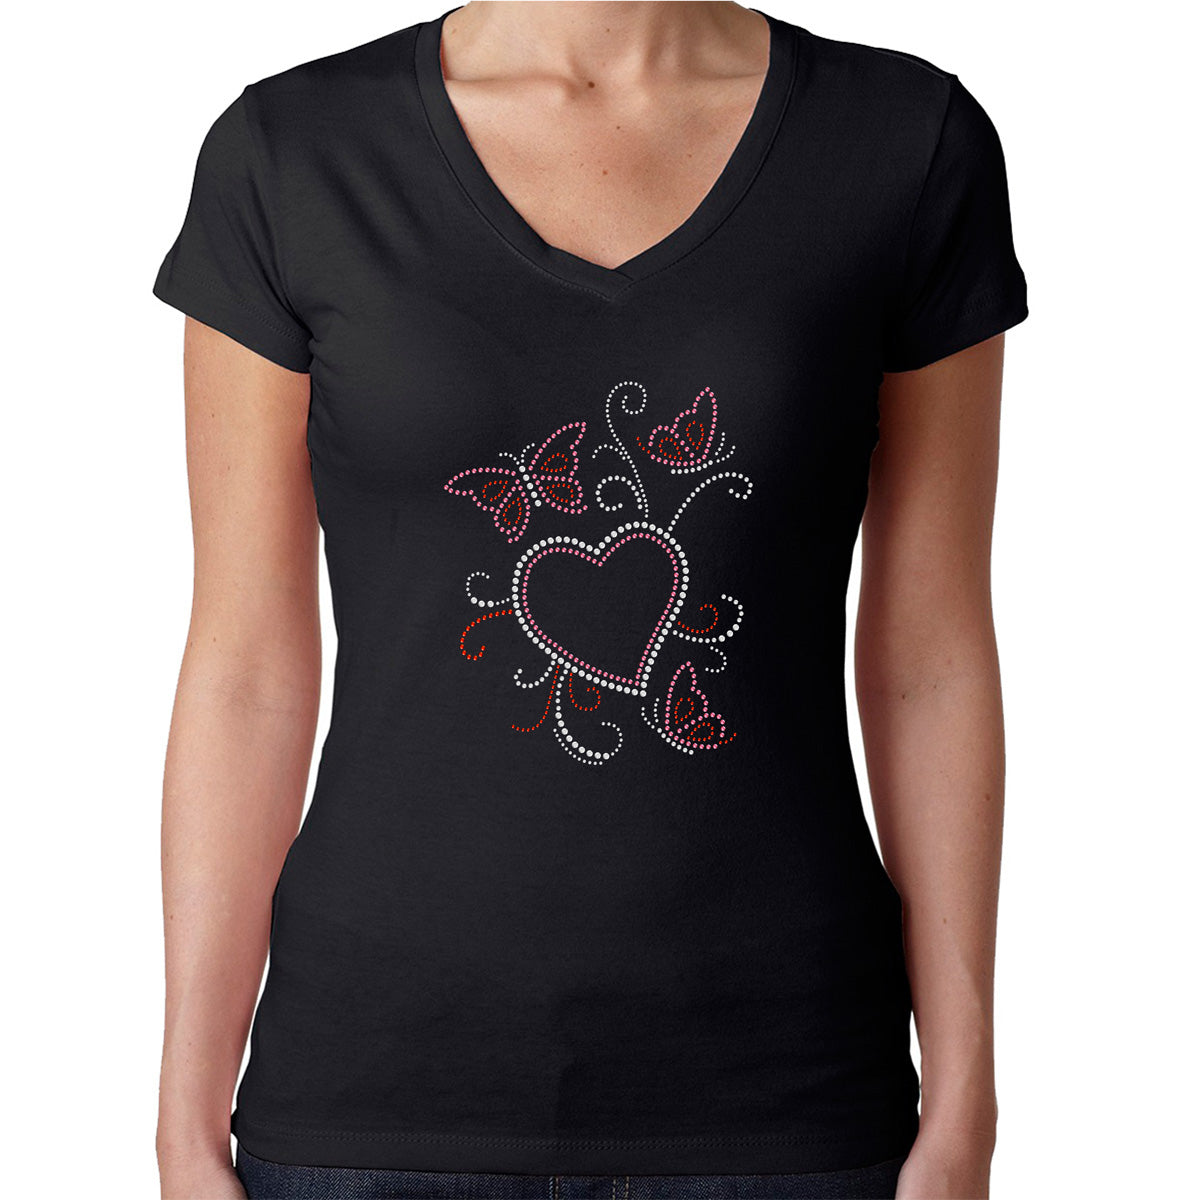 Womens T-Shirt Rhinestone Bling Black Fitted Tee Red White Love Heart Butterfly